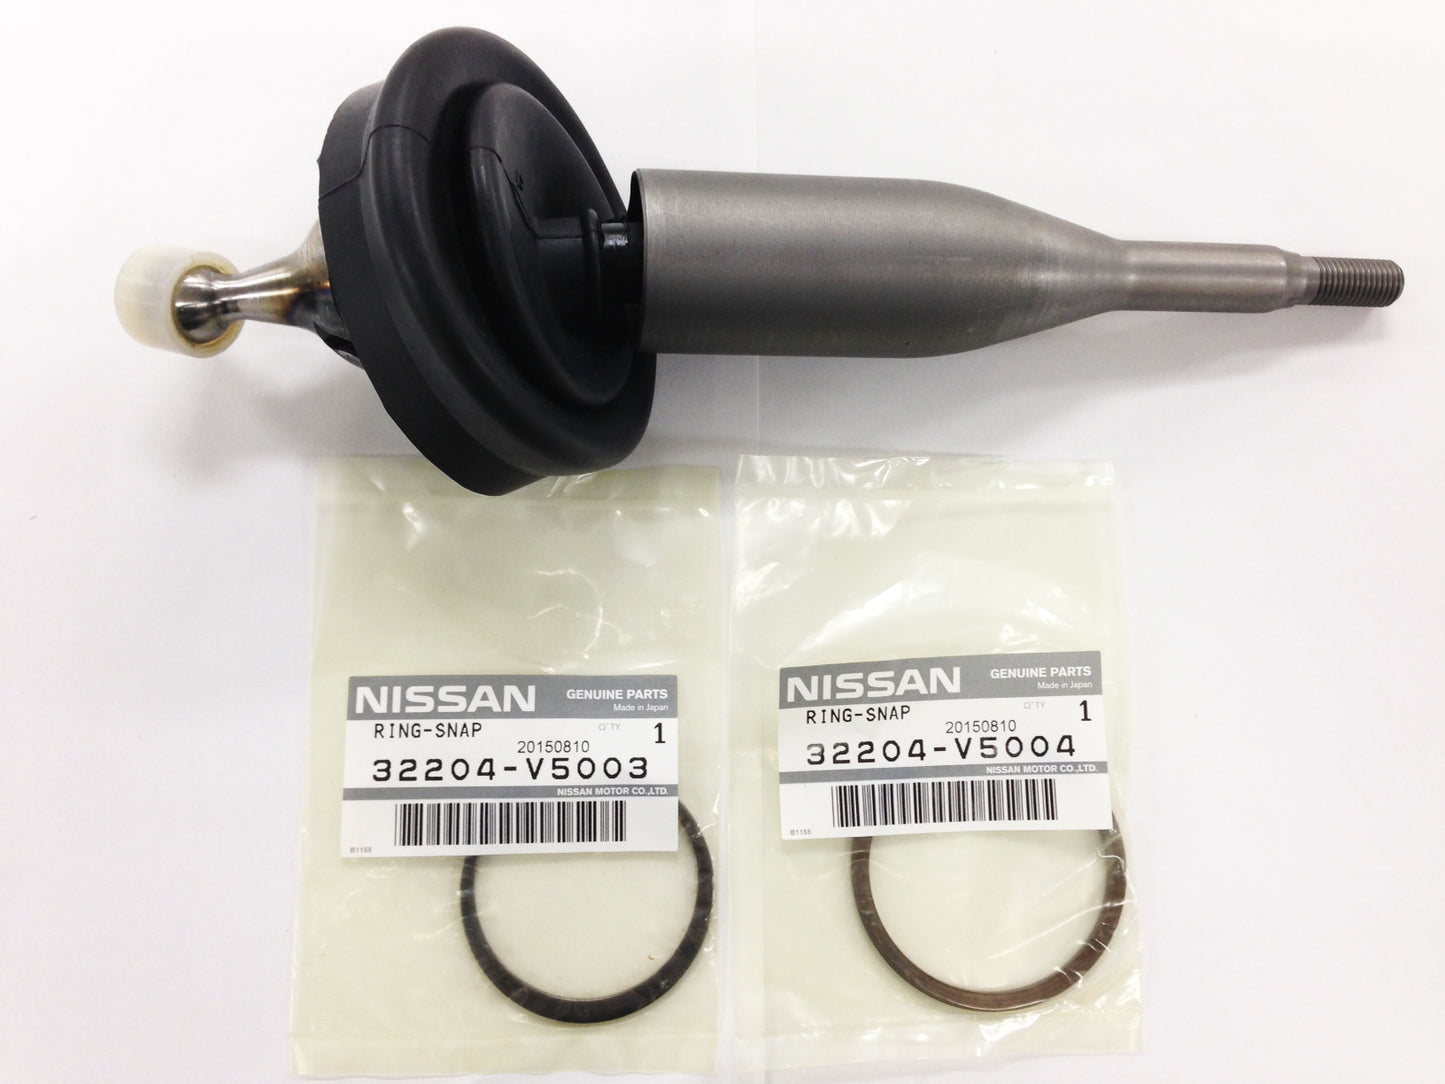 NISSAN Shift Lever with Circlip - BNR32 ##663151148S1